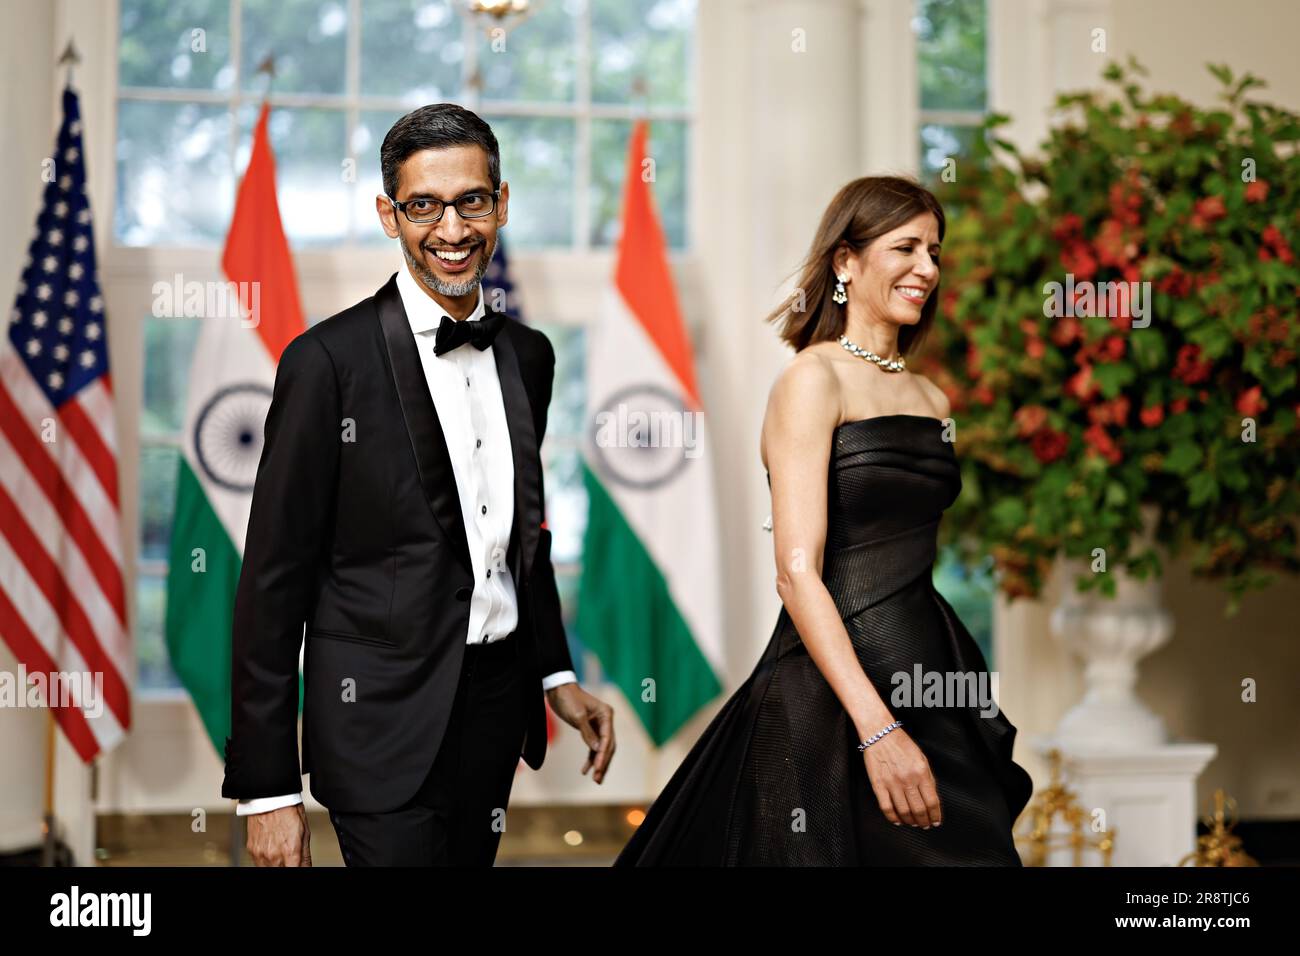 Washington, United States. 22nd June, 2023. Sundar Pichai, chief executive officer of Alphabet Inc., left, and Anjali Pichai arrive to attend a state dinner in honor of Indian Prime Minister Narendra Modi hosted by US President Joe Biden and First Lady Jill Biden at the White House in Washington, DC, US, on Thursday, June 22, 2023. Biden and Modi announced a series of defense and commercial deals designed to improve military and economic ties between their nations during a state visit at the White House today. Photographer: Ting Shen/Pool/Sipa USA Credit: Sipa USA/Alamy Live News Stock Photo